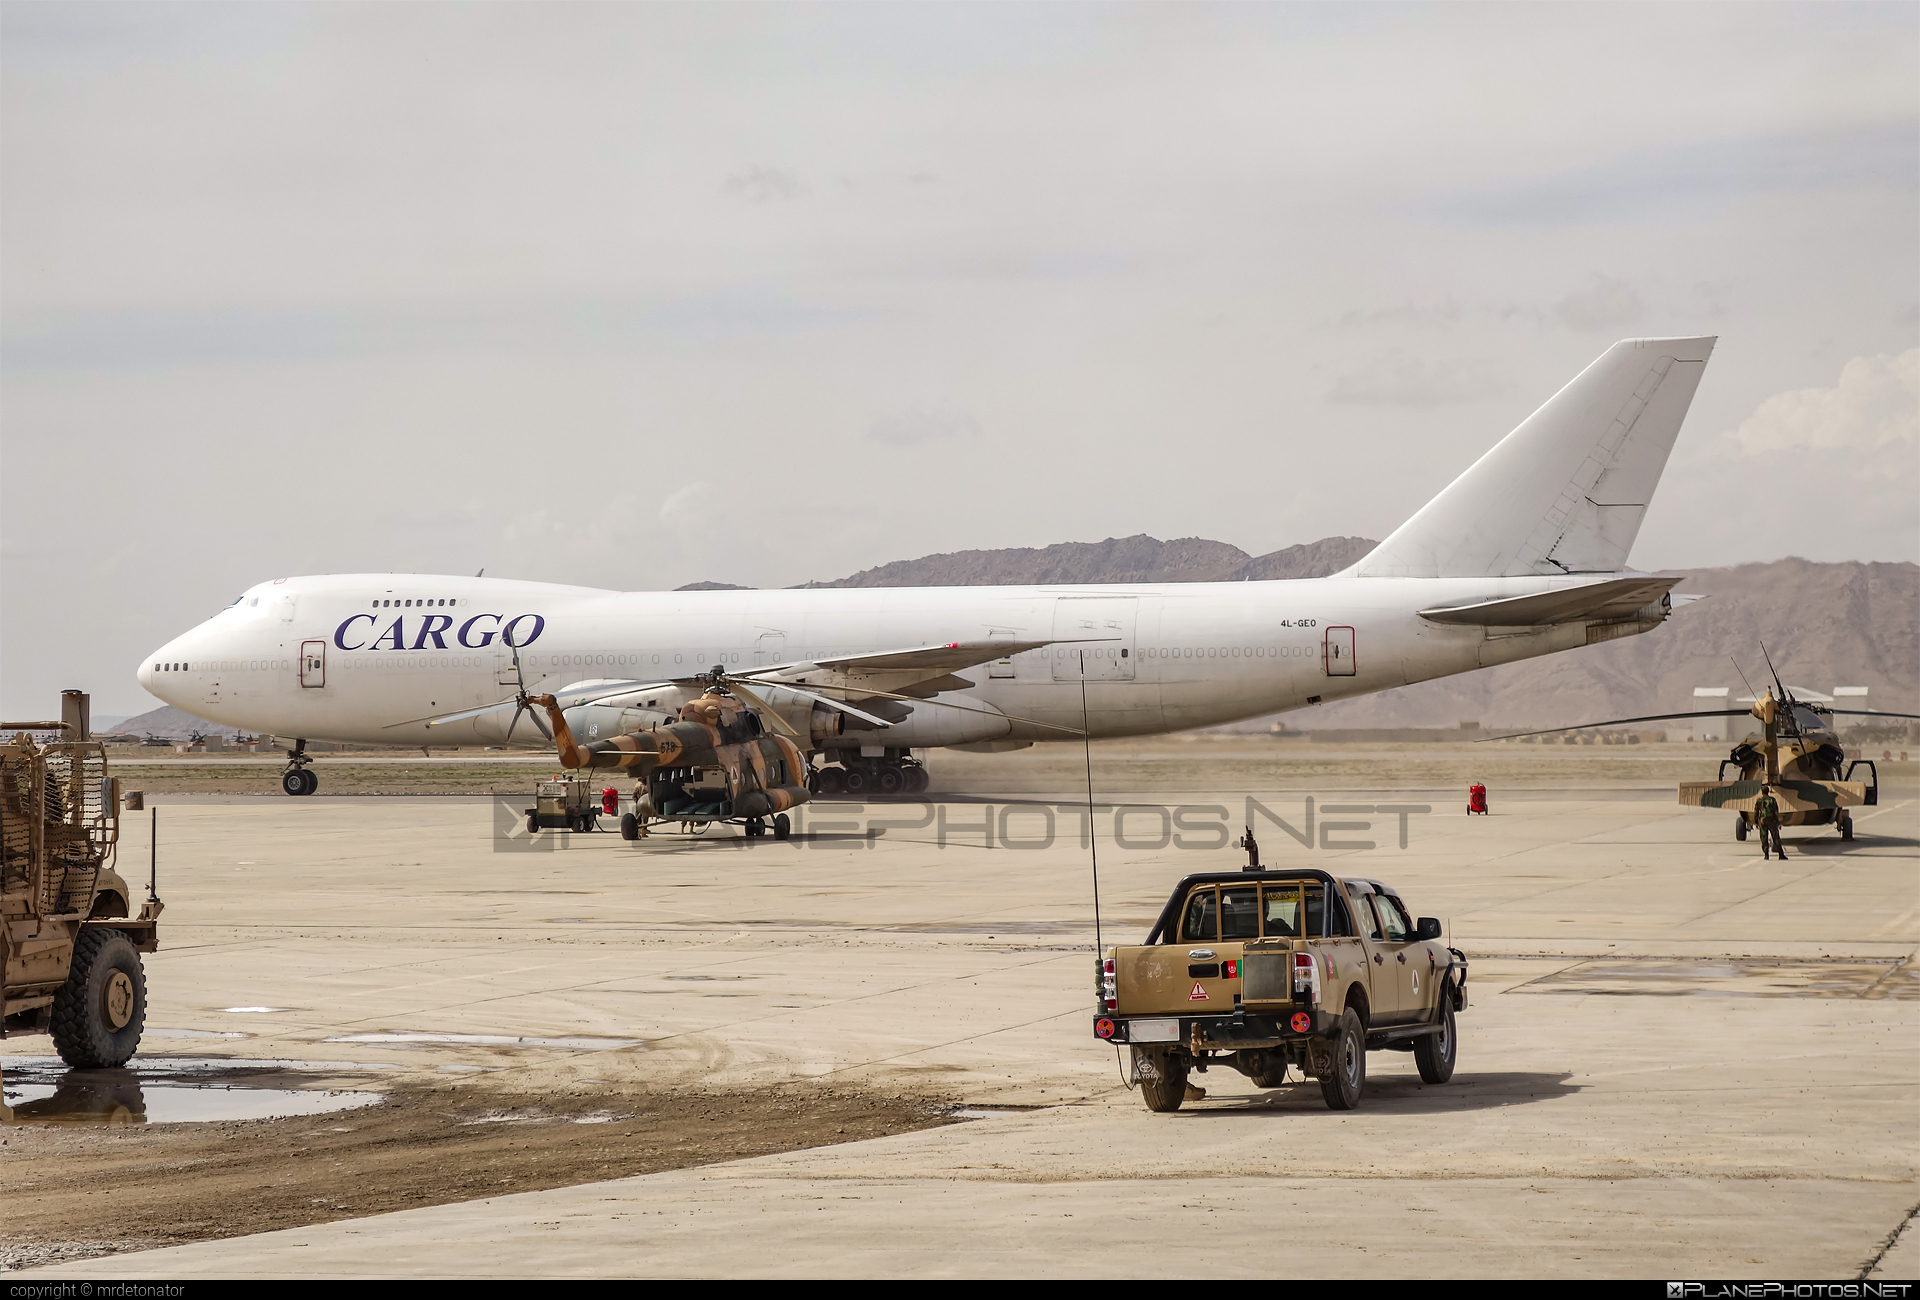 Boeing 747-200BSF - 4L-GEO operated by The Cargo Airlines #b747 #b747bsf #boeing #boeing747 #jumbo